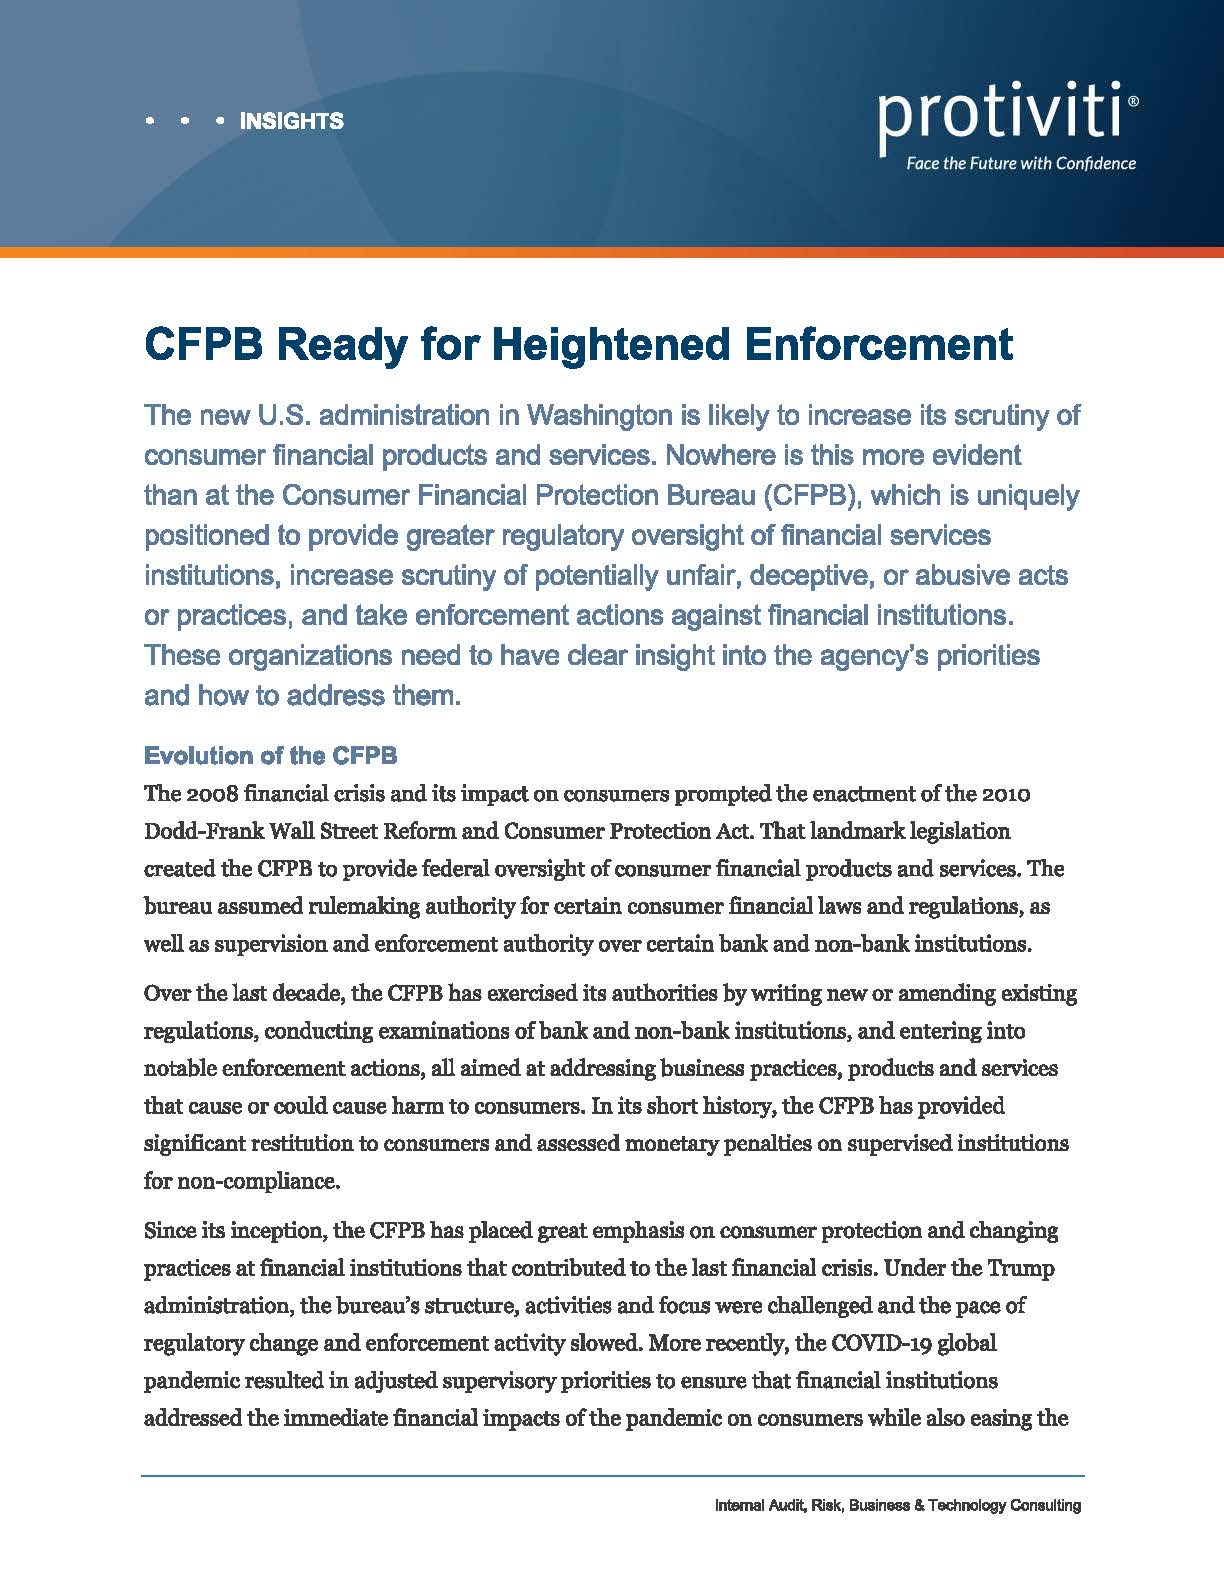 Screenshot of the first page of CFPB Ready for Heightened Enforcement